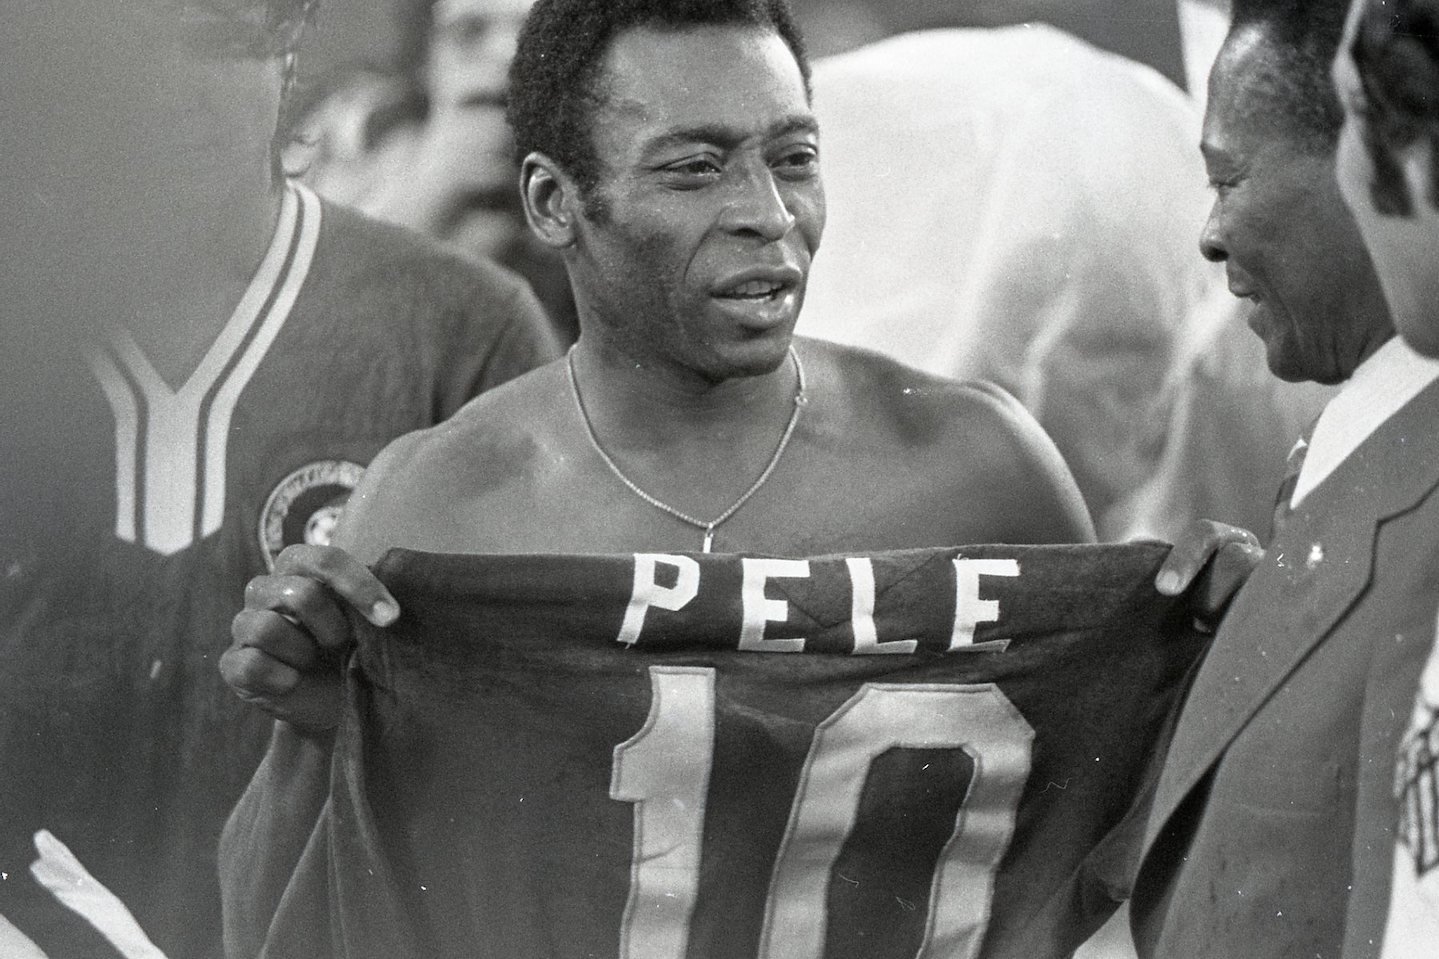 A black and white photo of Pelé holding his jersey up after a game